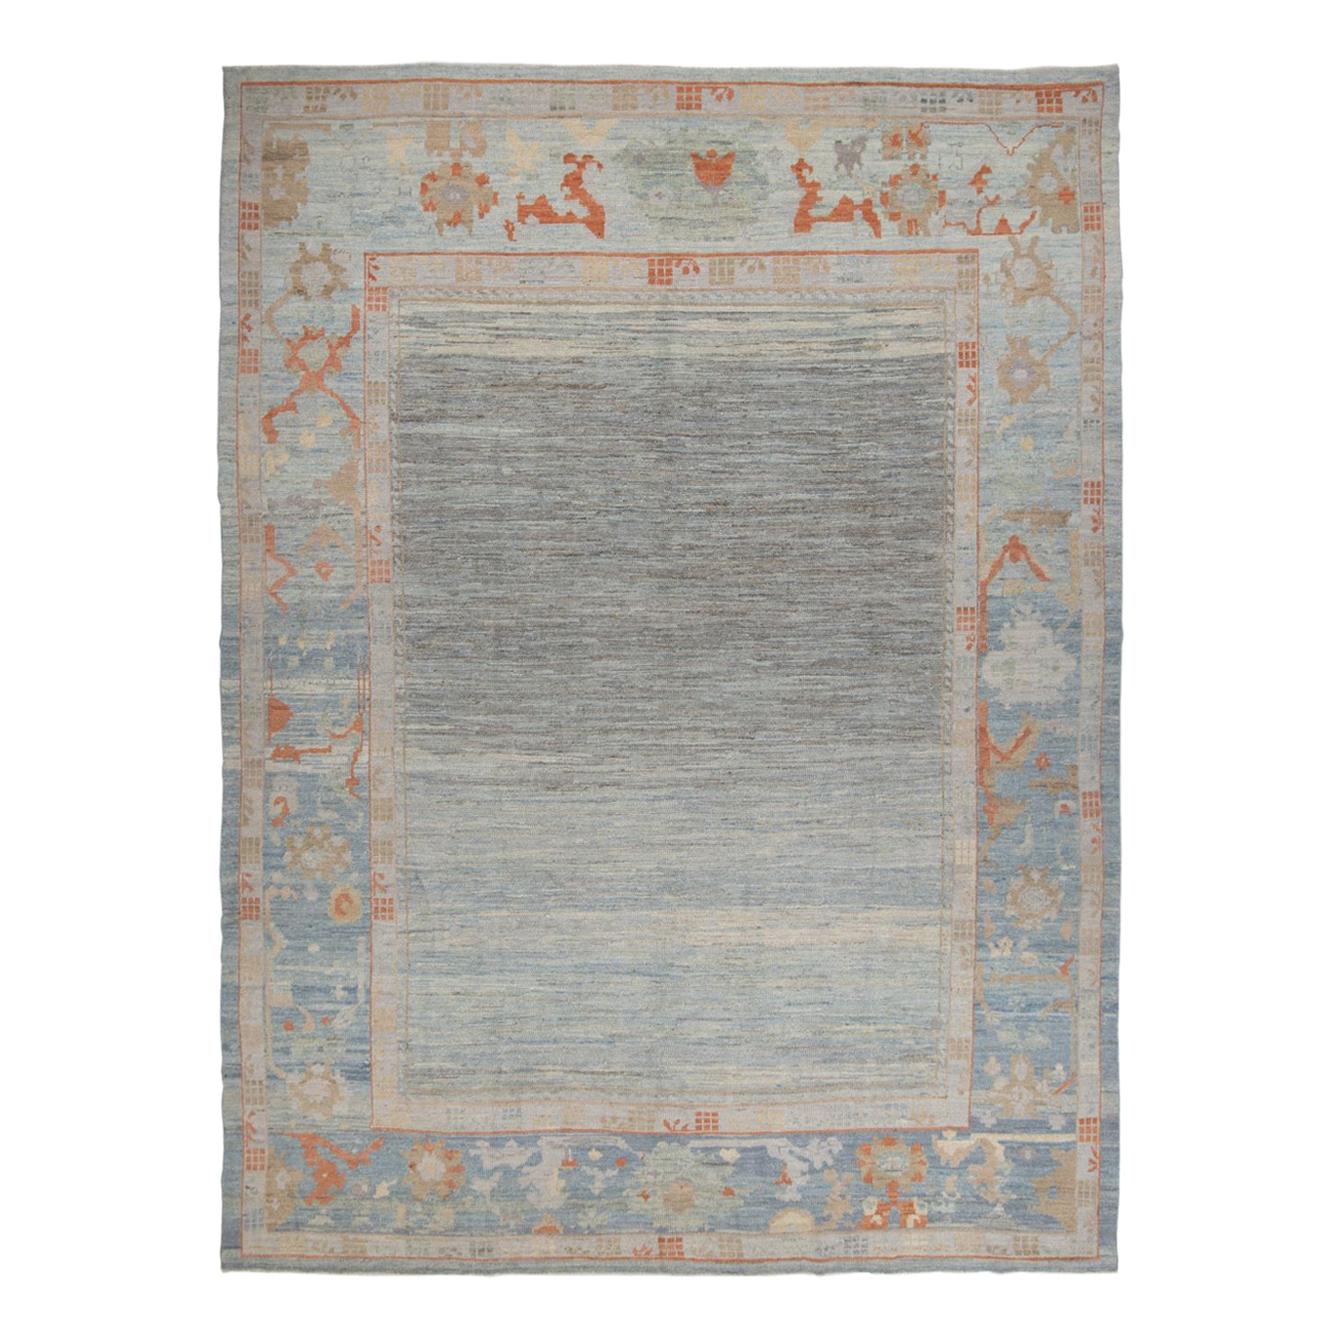 Modern Turkish Oushak Rug. Size: 8 ft 10 in x 11 ft 7 in (2.69 m x 3.53 m)